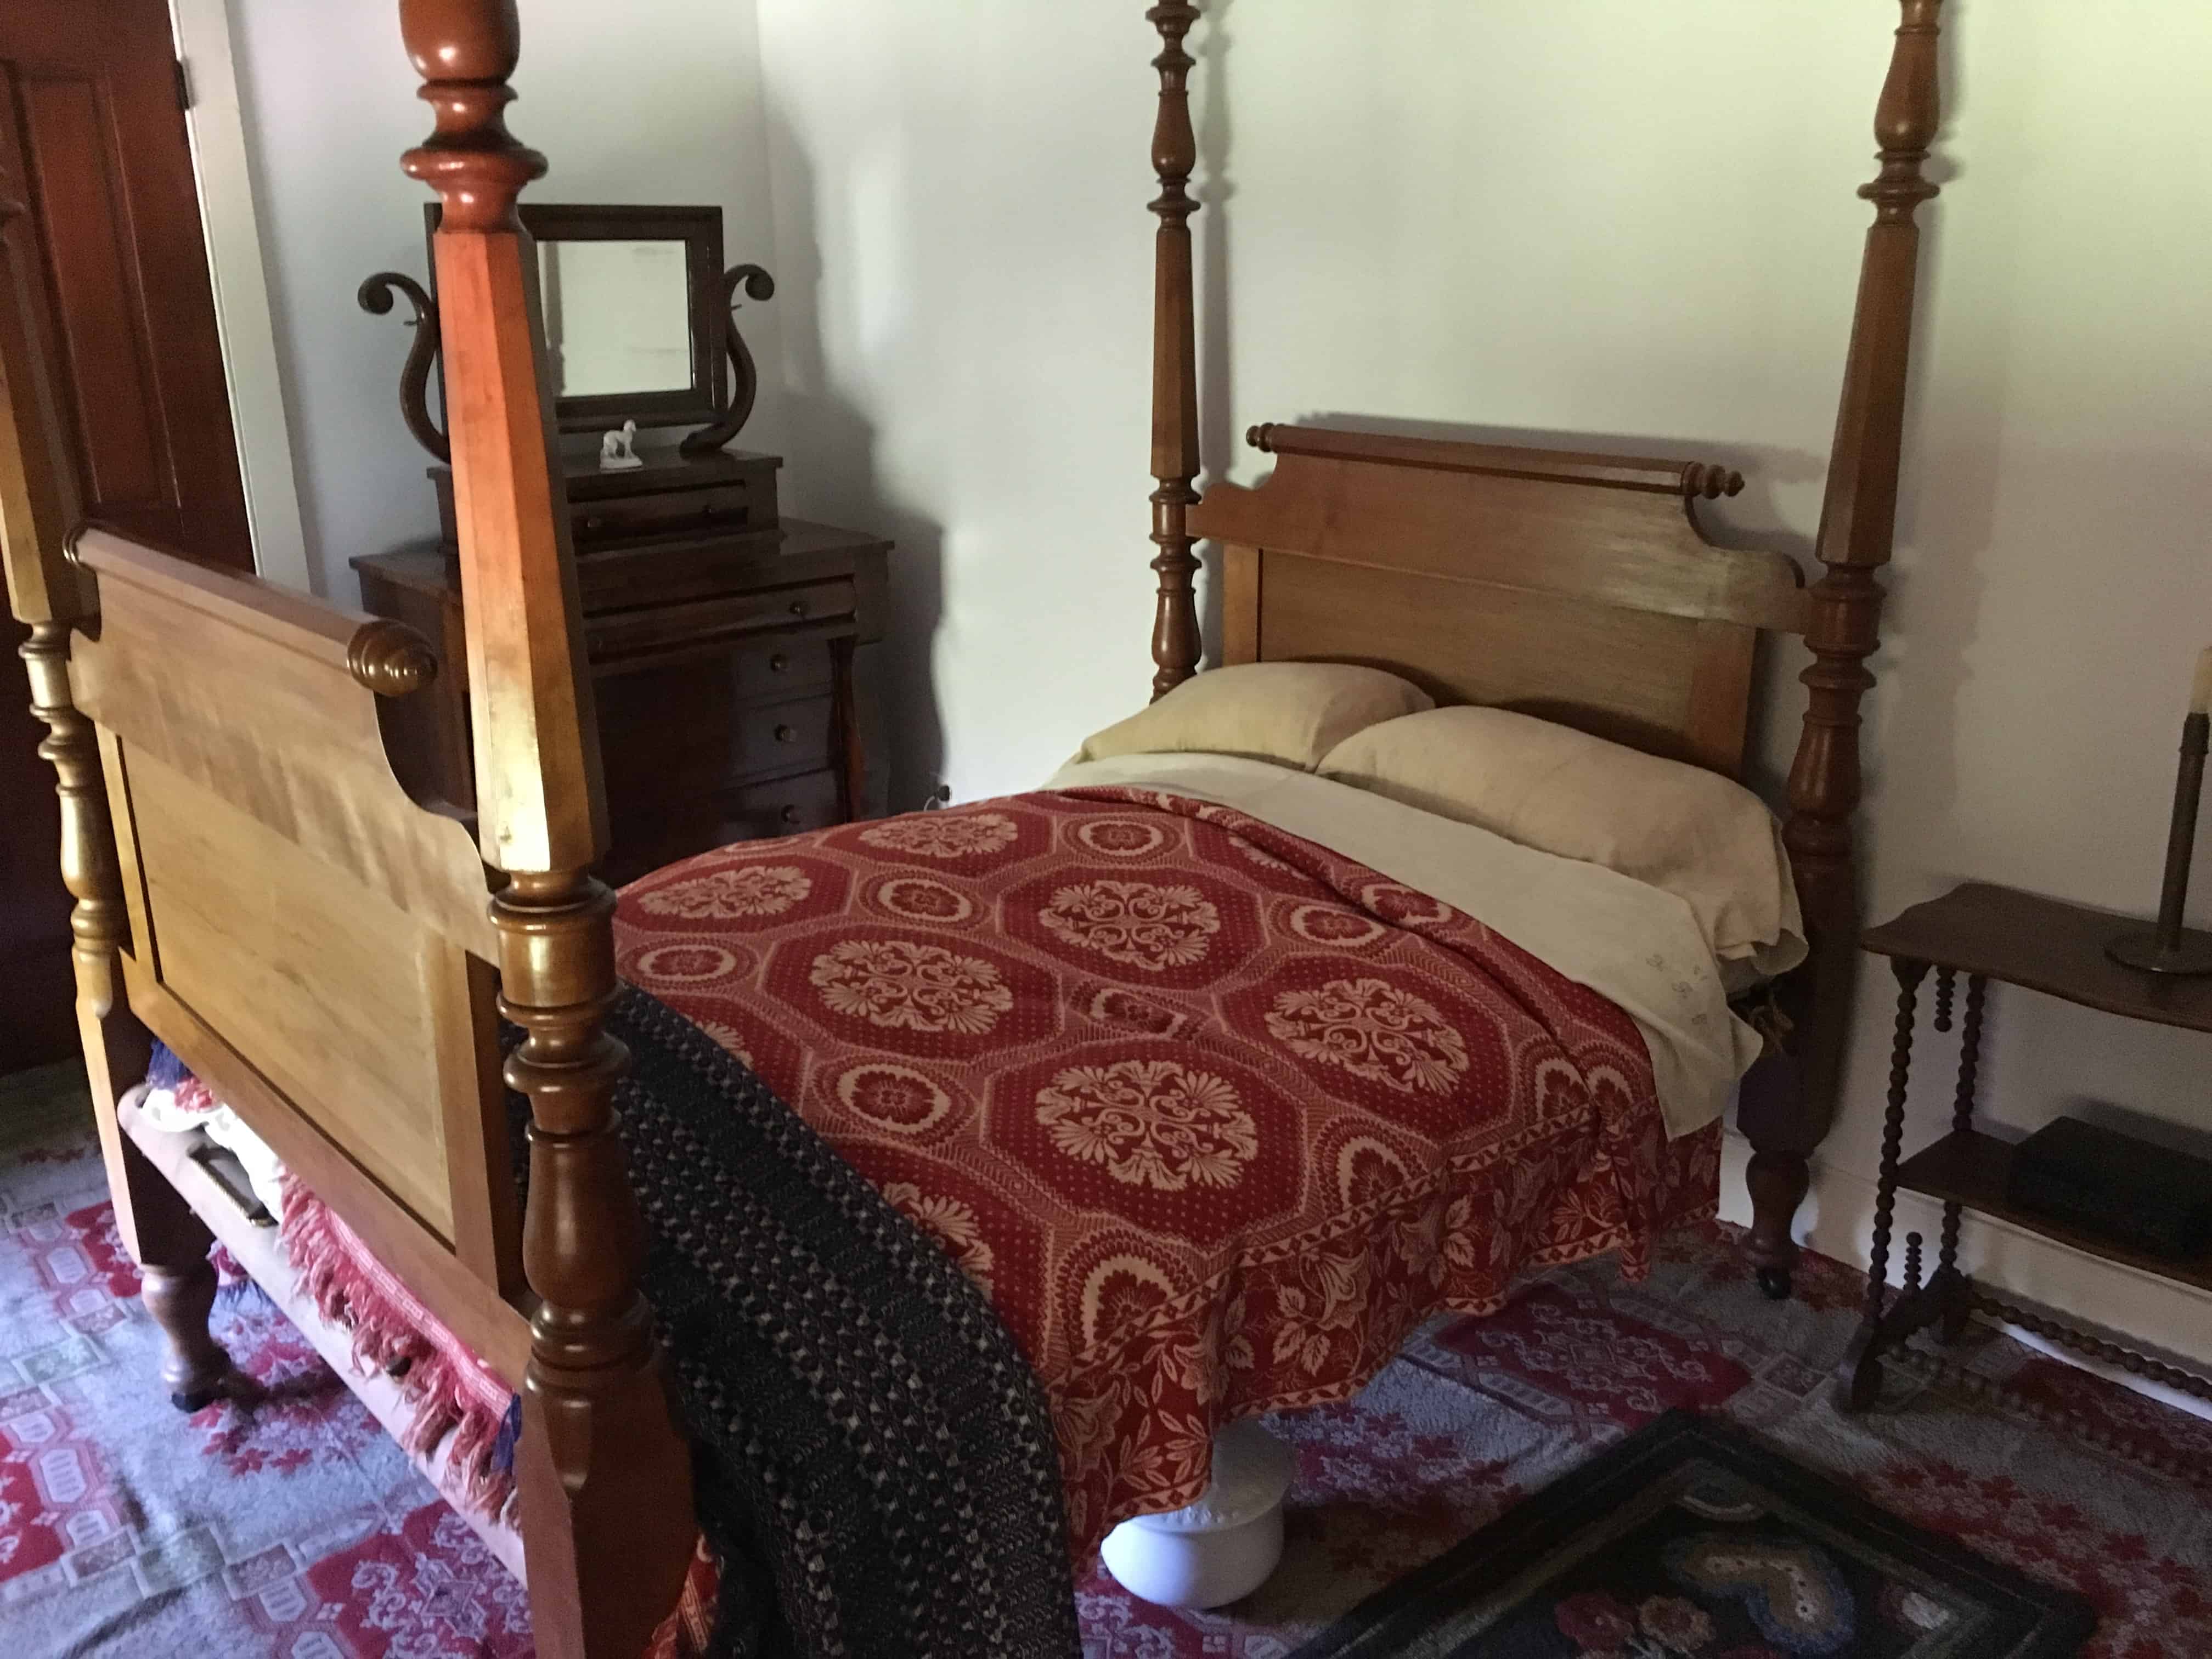 Guest room at the Henry B. Clarke House in Chicago, Illinois